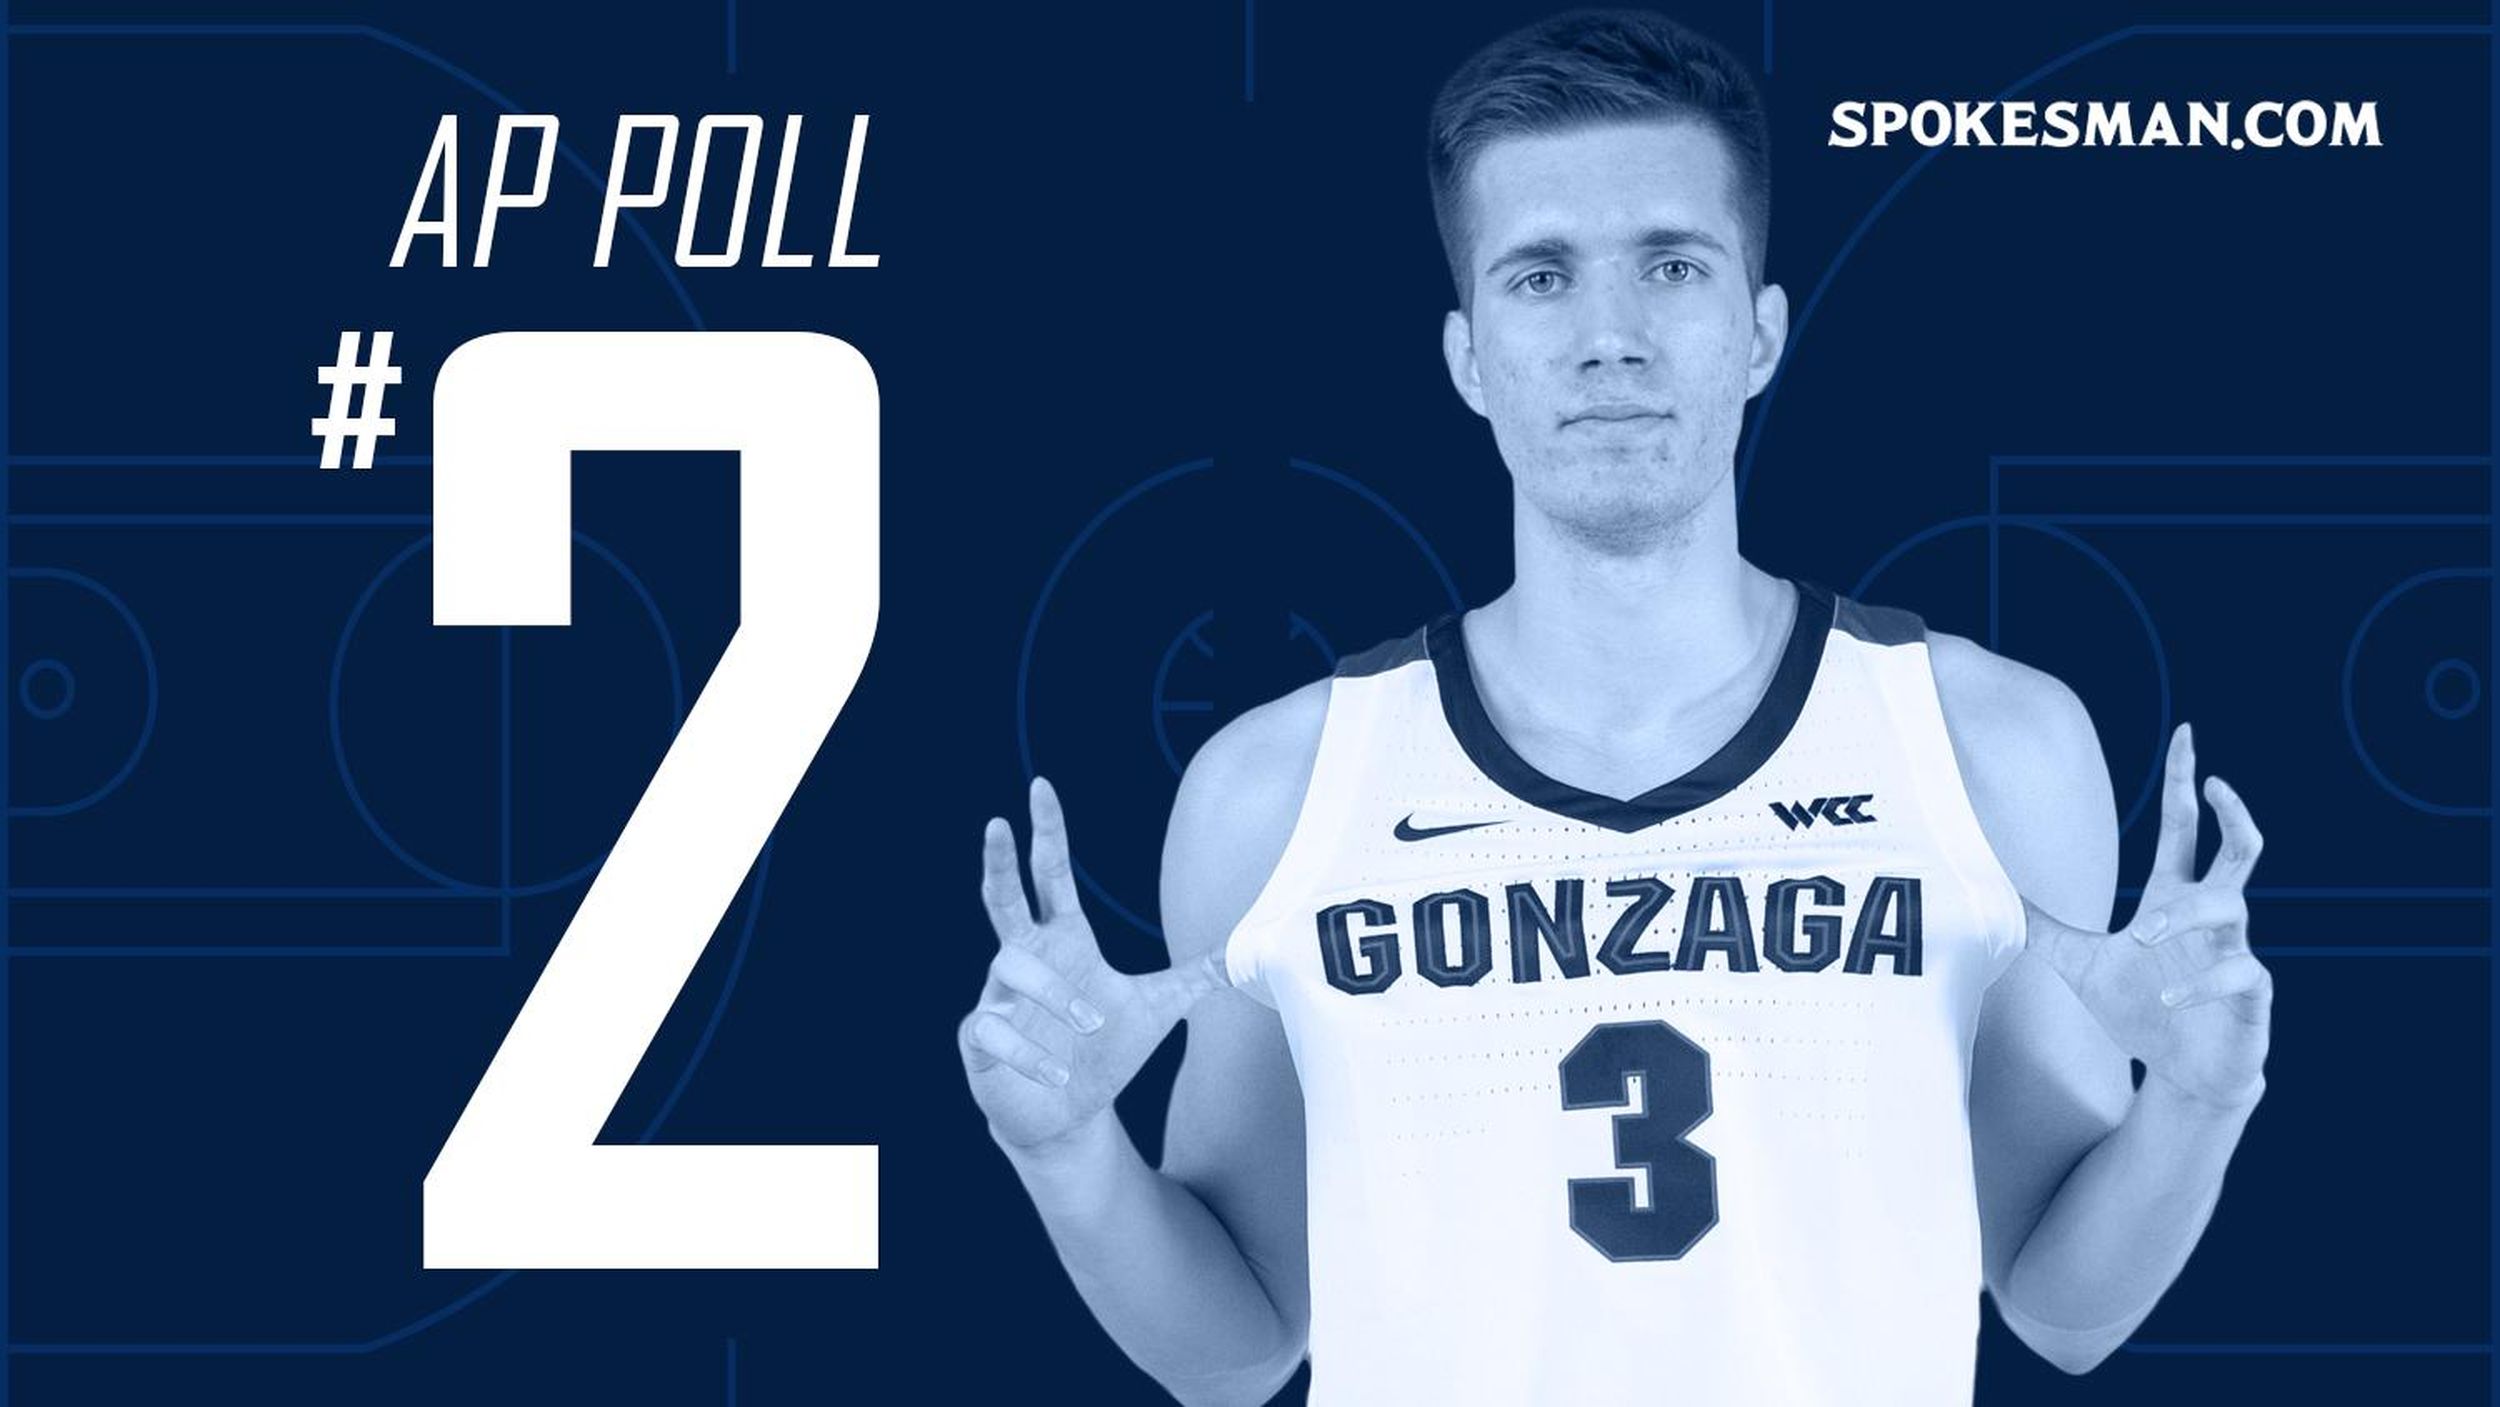 Gonzaga No. 2 in AP poll, No. 6 in NCAA’s initial NET rankings The